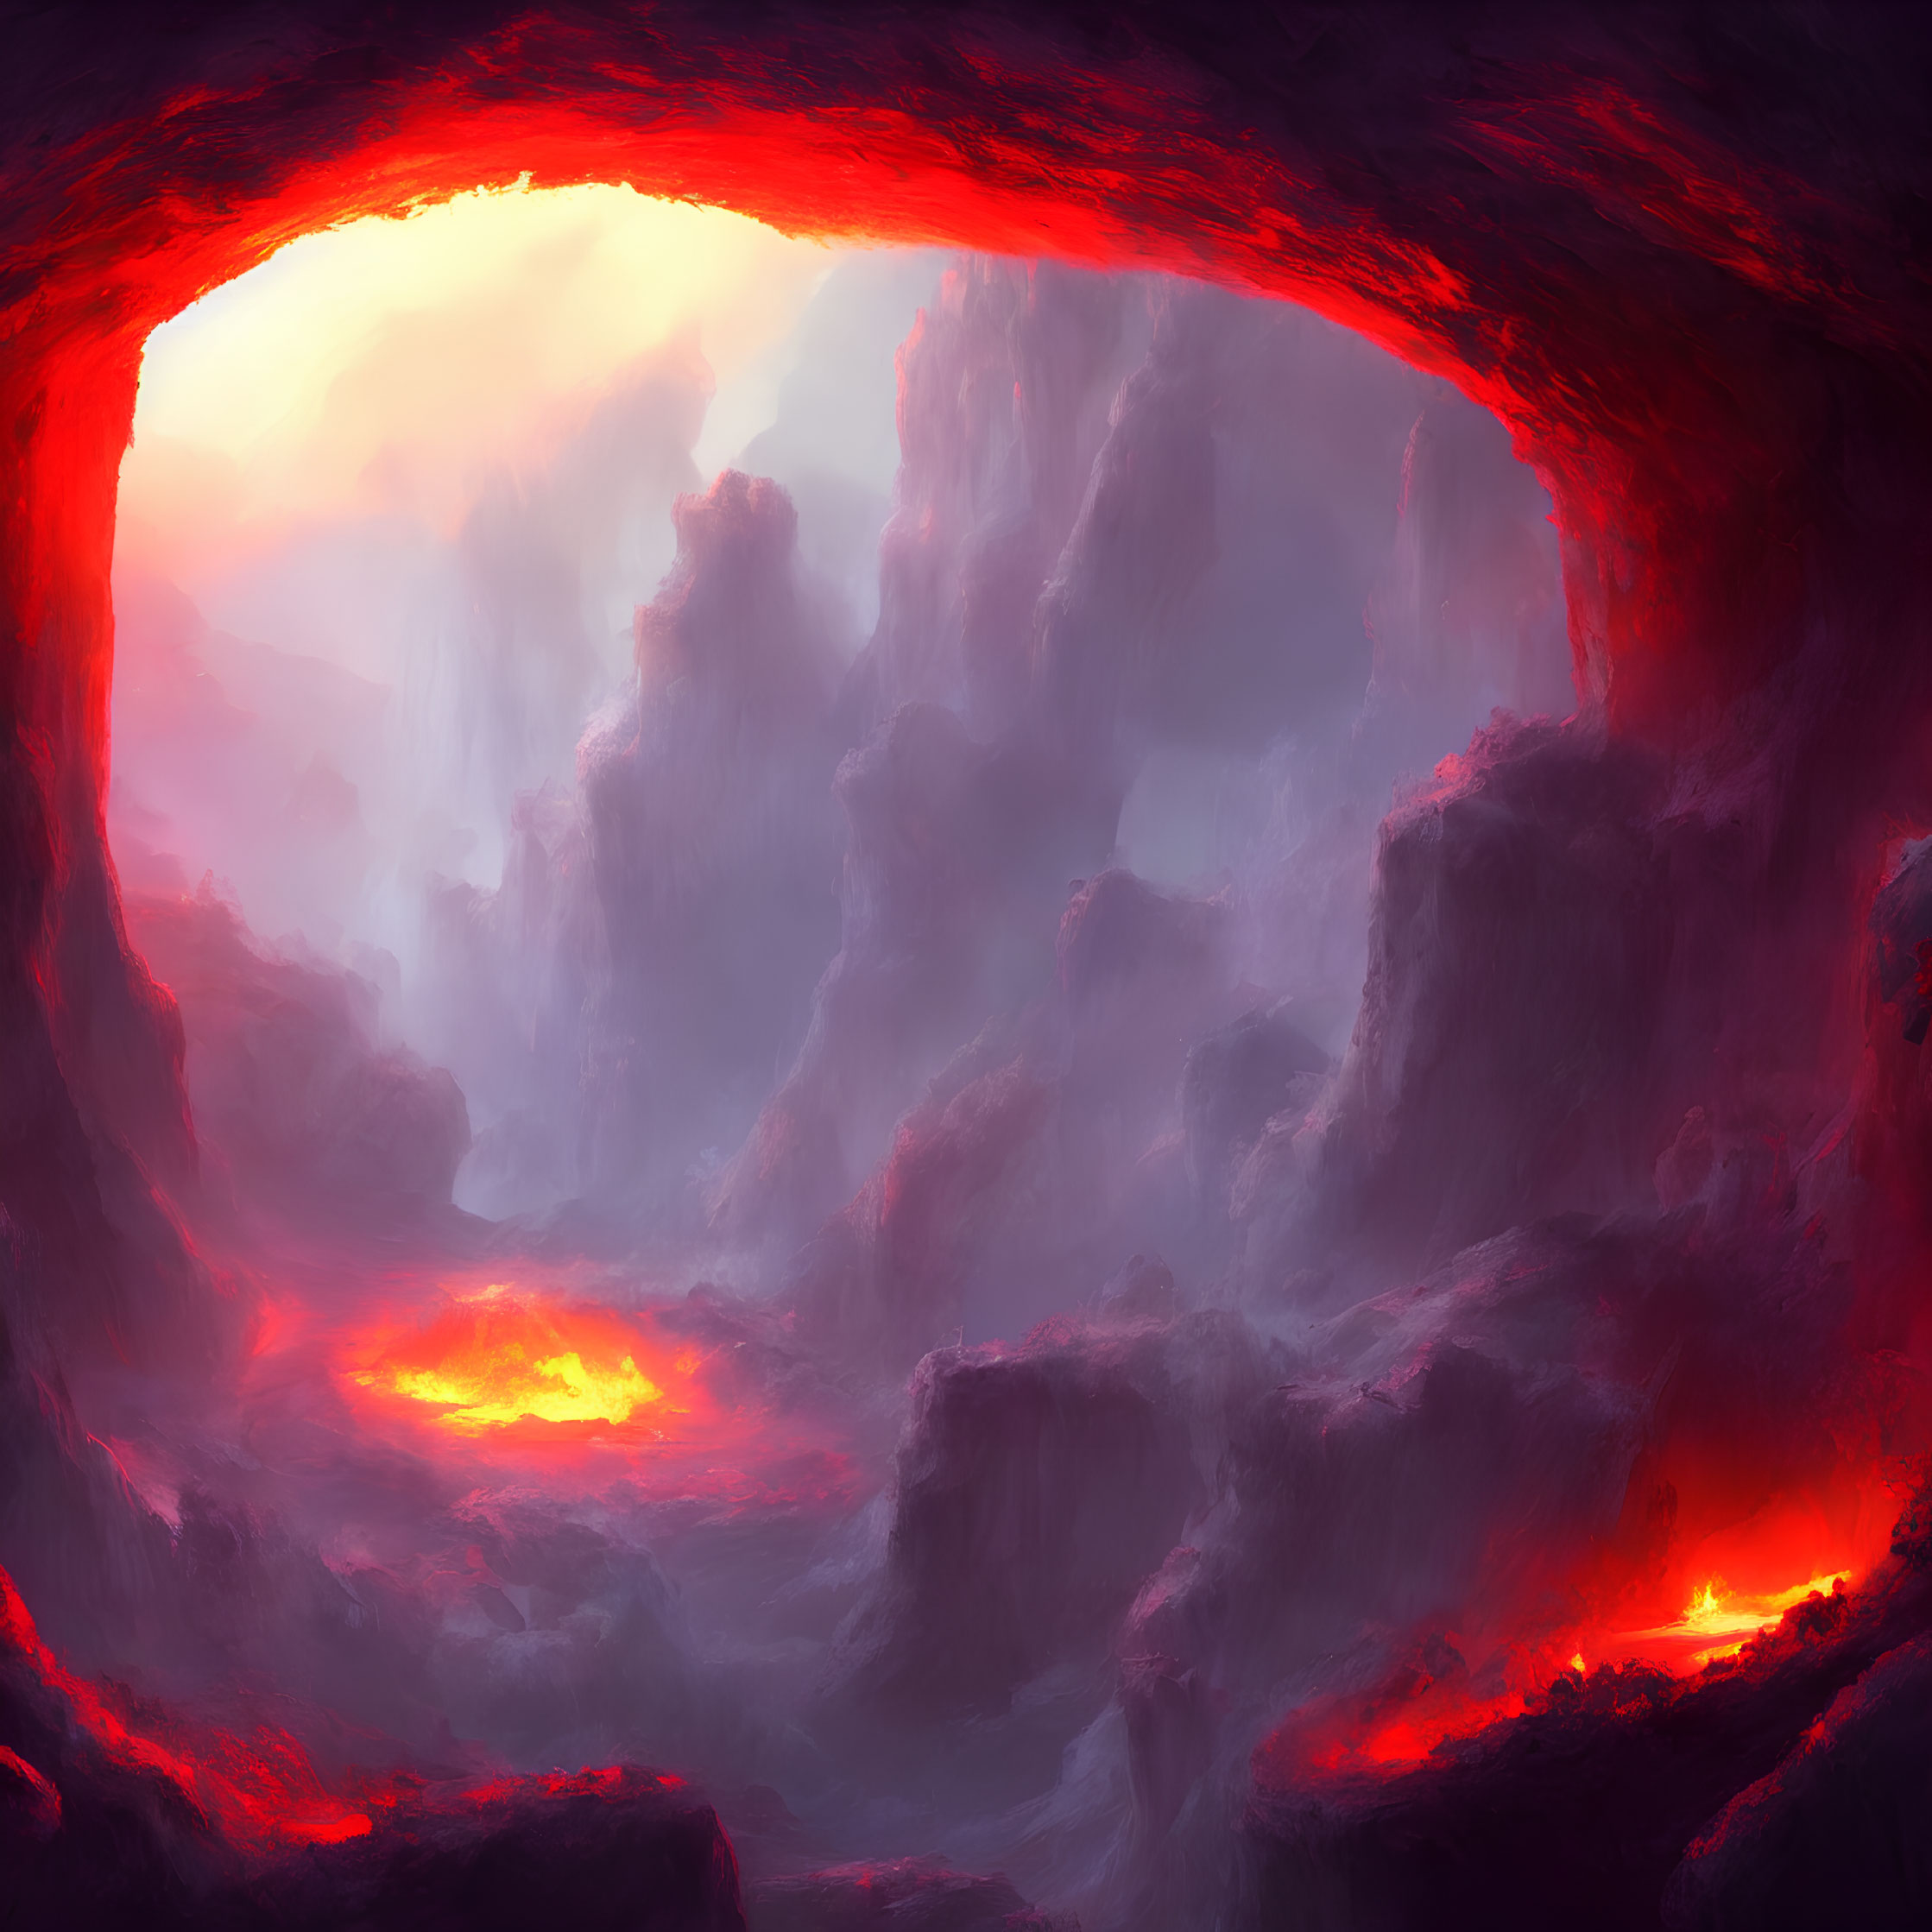 Vivid painting of volcanic cavern with glowing lava